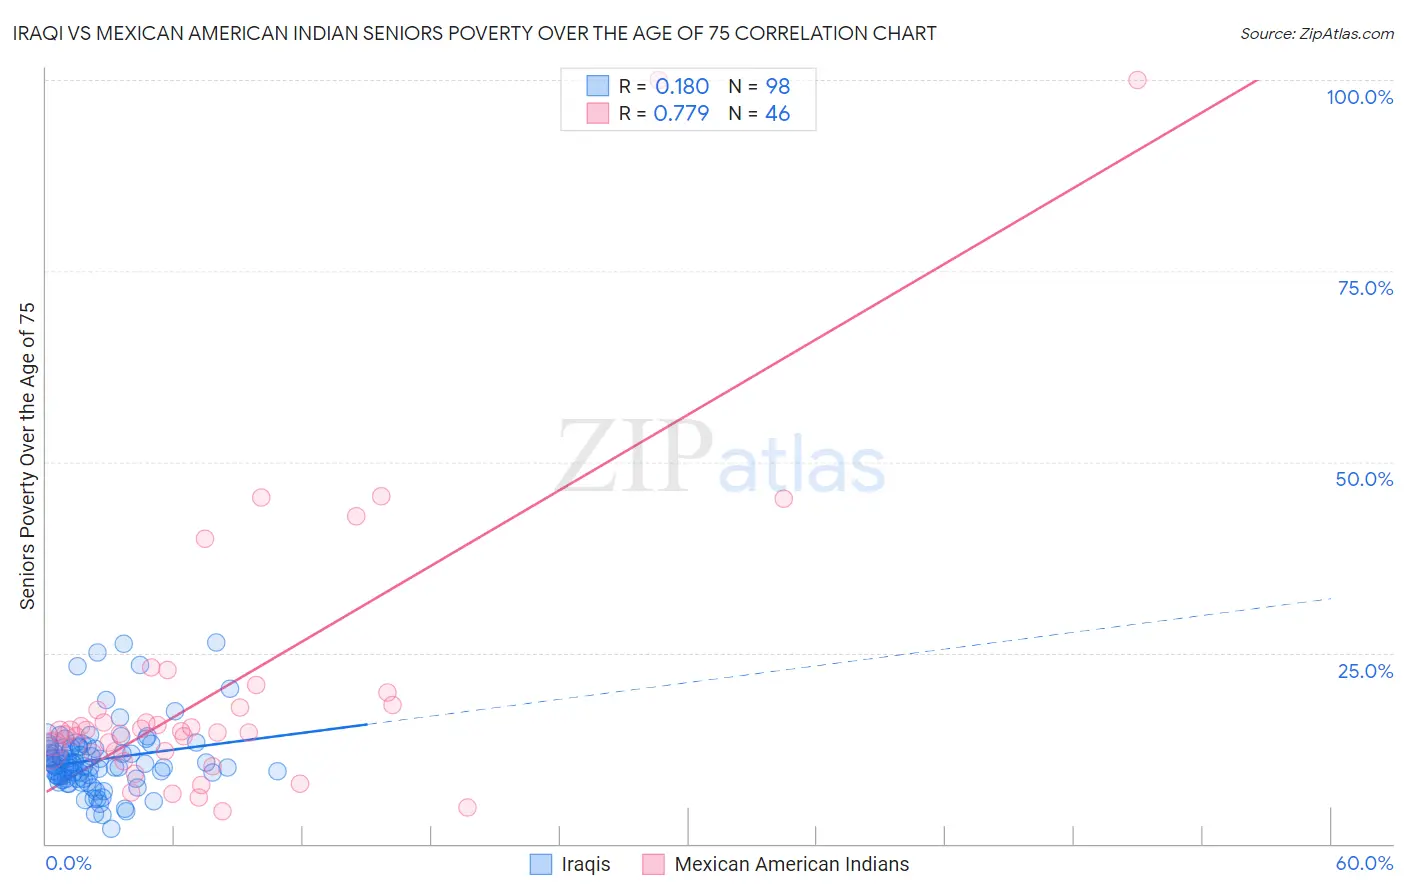 Iraqi vs Mexican American Indian Seniors Poverty Over the Age of 75